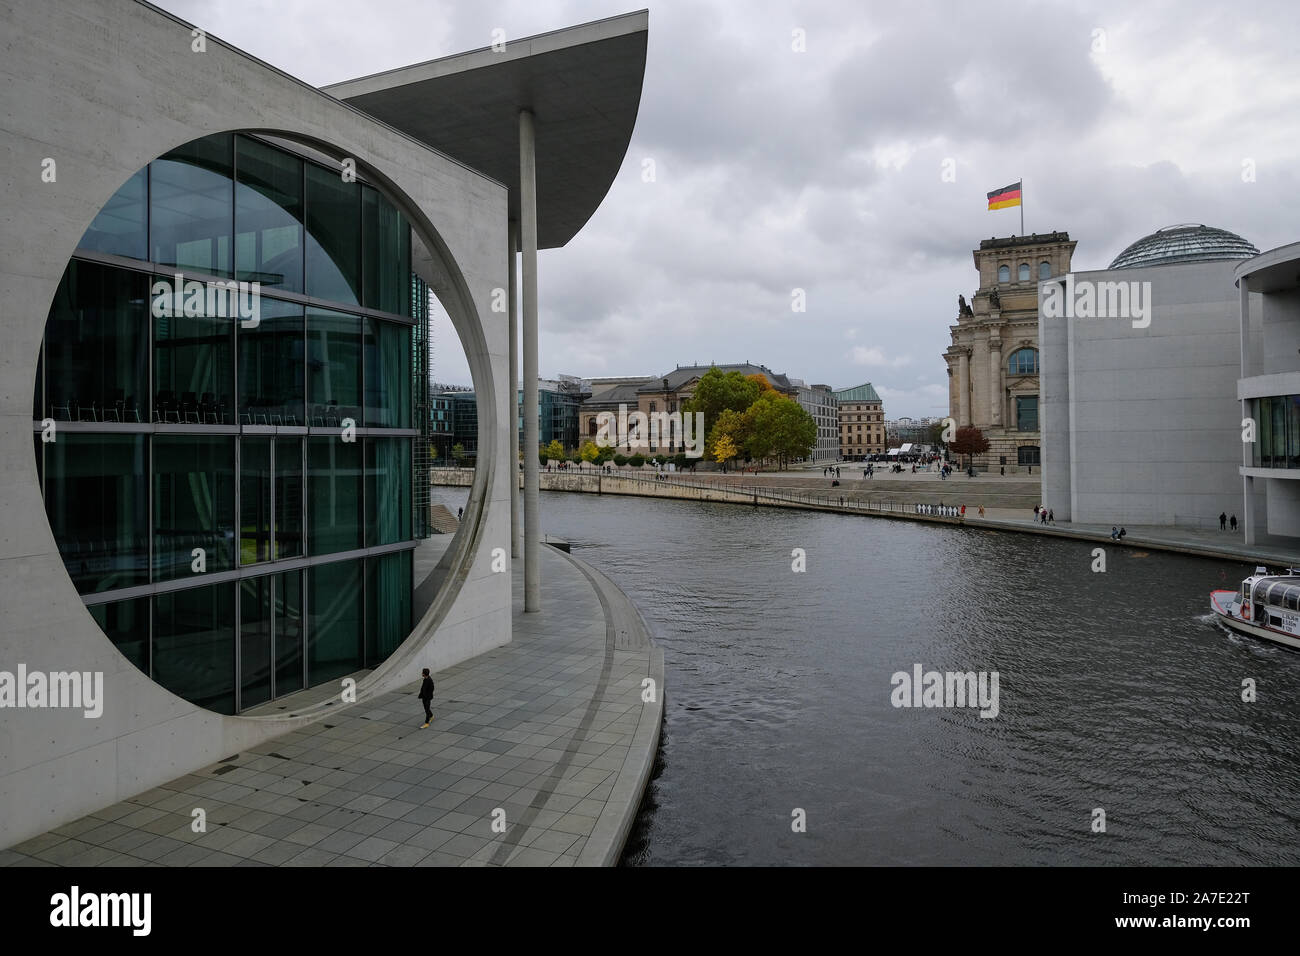 Berlin city reichstag riverside view with people tourists and public transport Stock Photo